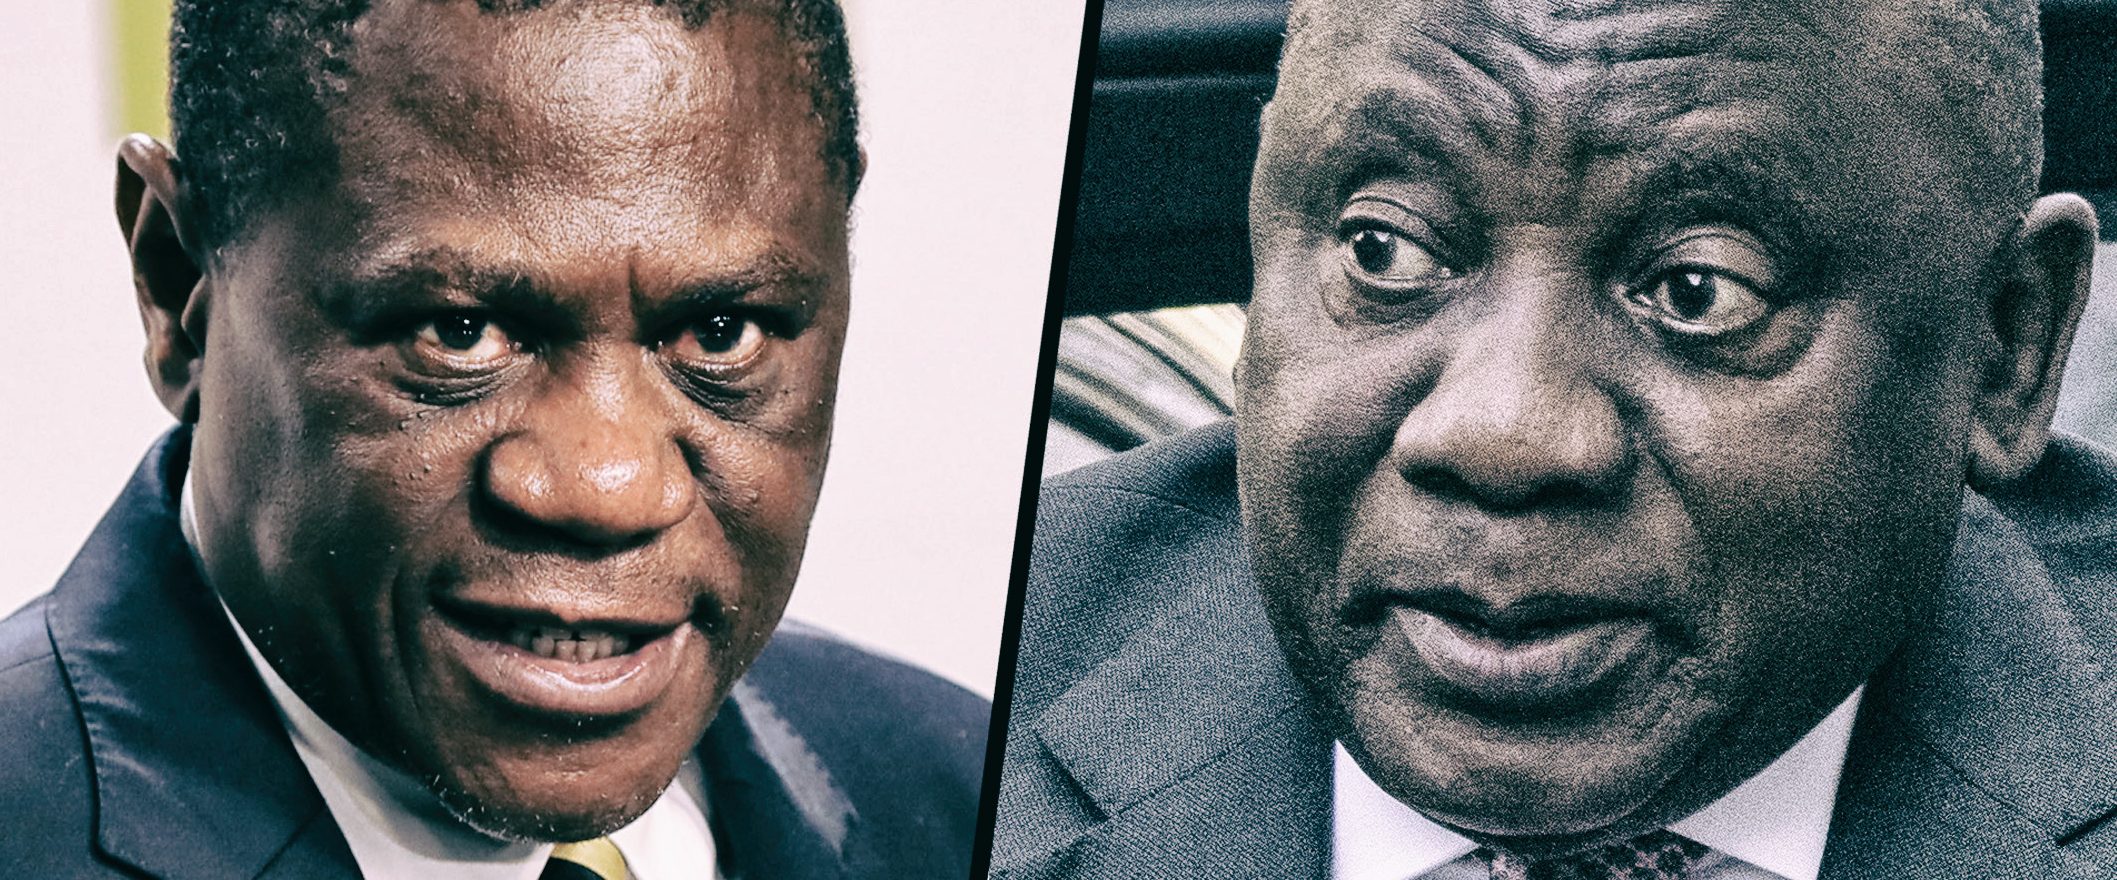 Paul Mashatile and Cyril Ramaphosa are up for election at the ANC conference